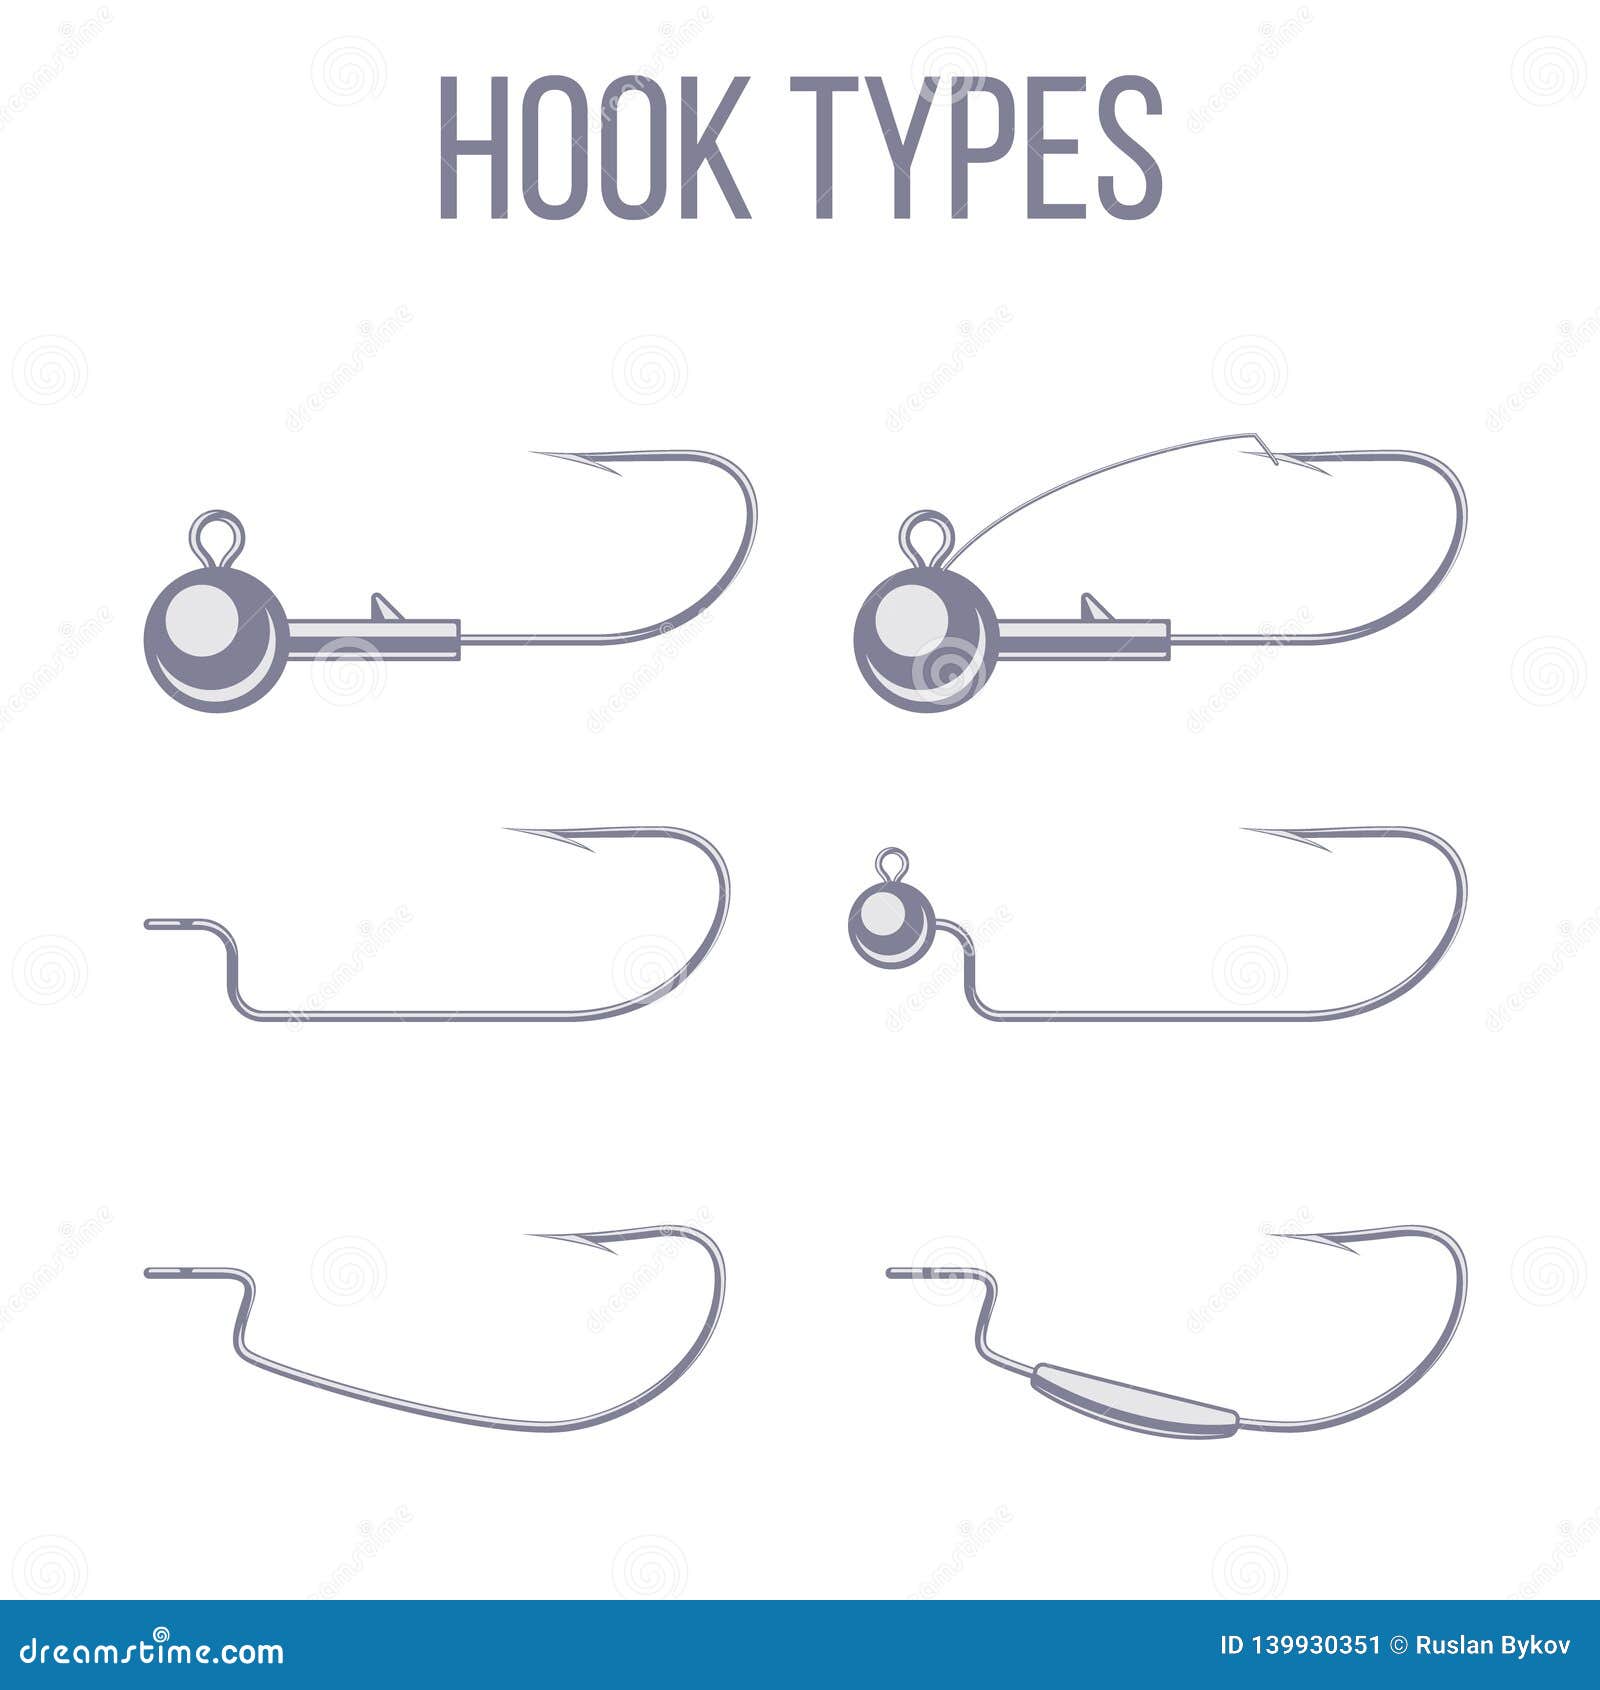 hook and sinker types with offset hooks for catching predatory fish with soft plastic bait and spinning rod.